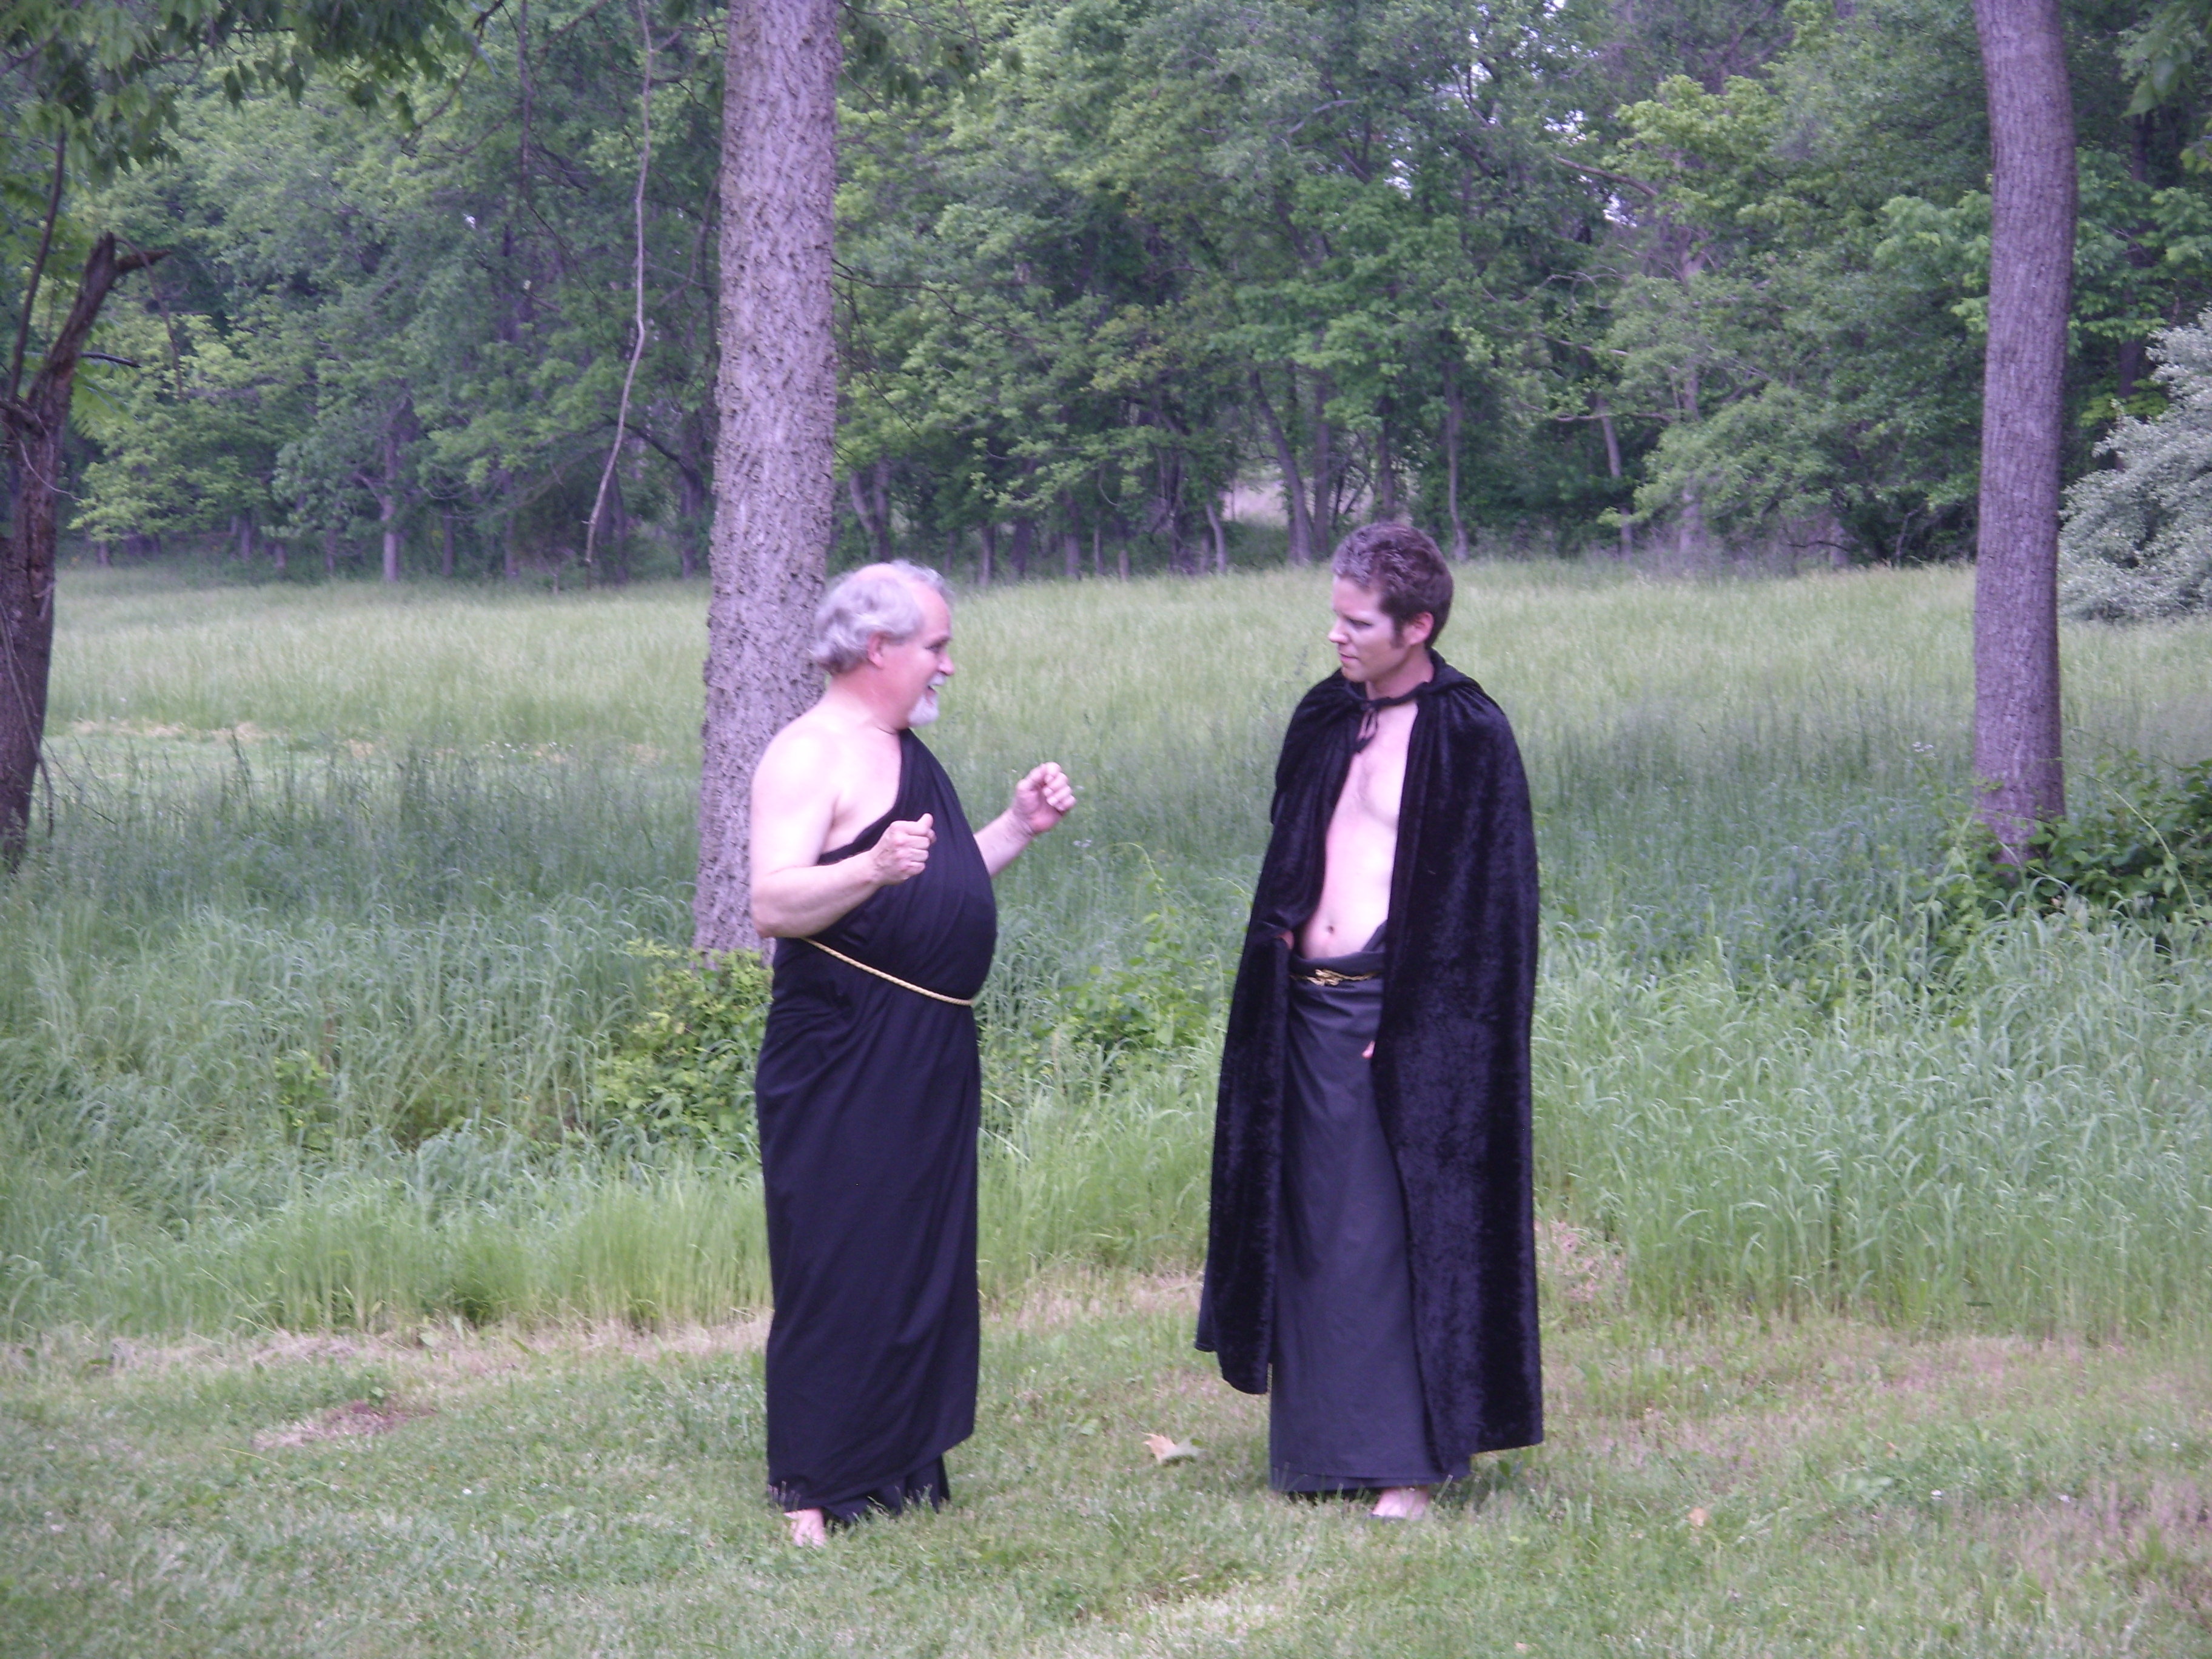 Ares (Neil McDonald) talking to Hades (Bryan Kreutz) just outside of Mount Olympus. Ares entertaining Hades idea to plan an attack together and both rule Mt.Olympus.